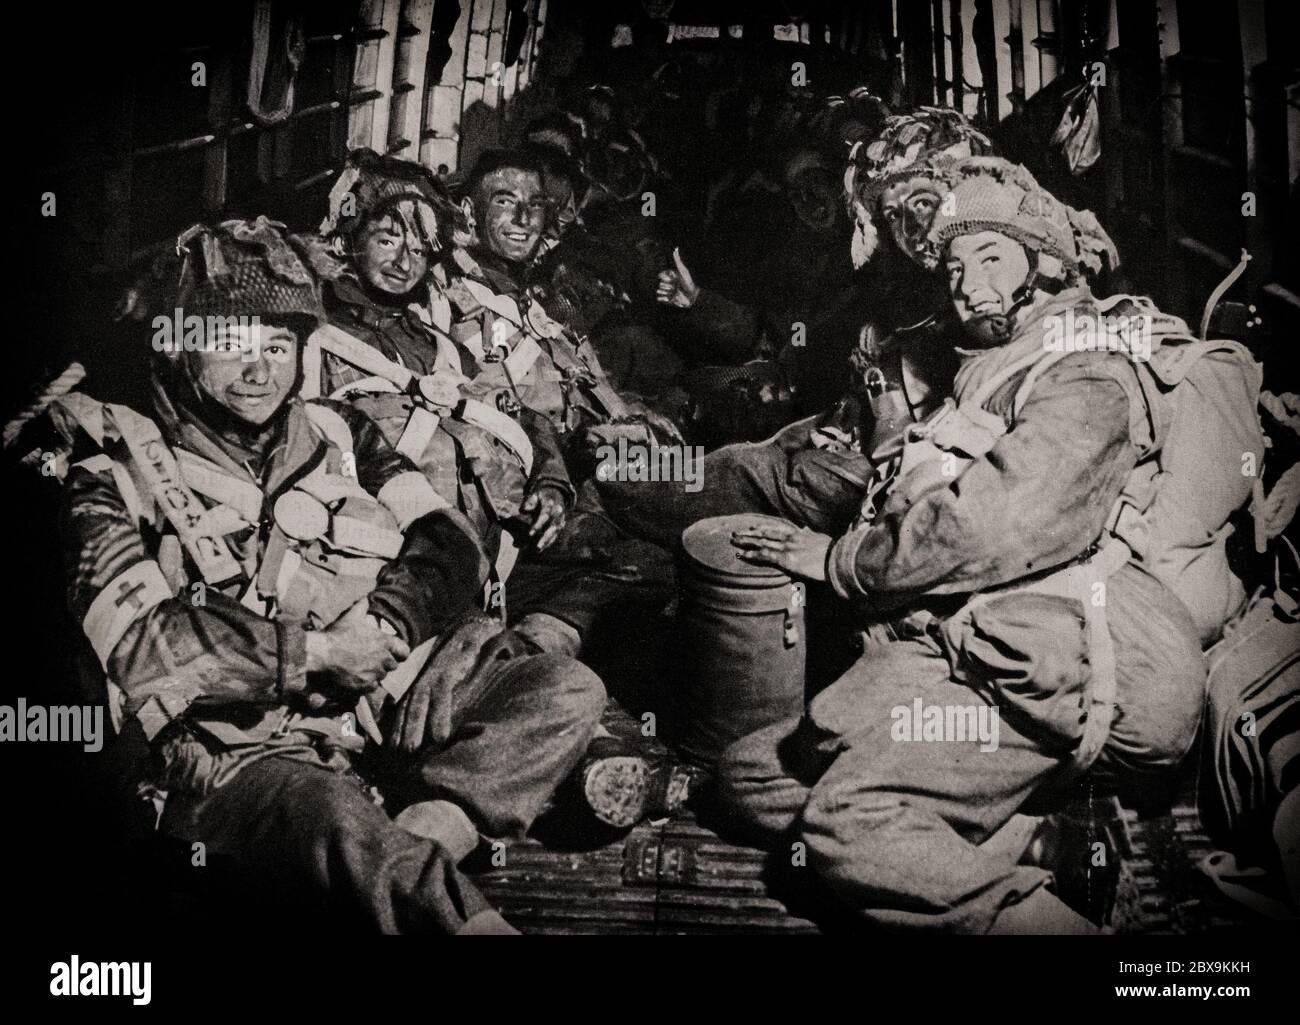 British Paratroopers en route for Normandy during the Allied invasion of Normandy in Operation Overlord during World War II. Codenamed Operation Neptune and often referred to as D-Day, it was the largest seaborne invasion in history. The operation began the liberation of German-occupied France (and later western Europe) and laid the foundations of the Allied victory on the Western Front. Stock Photo